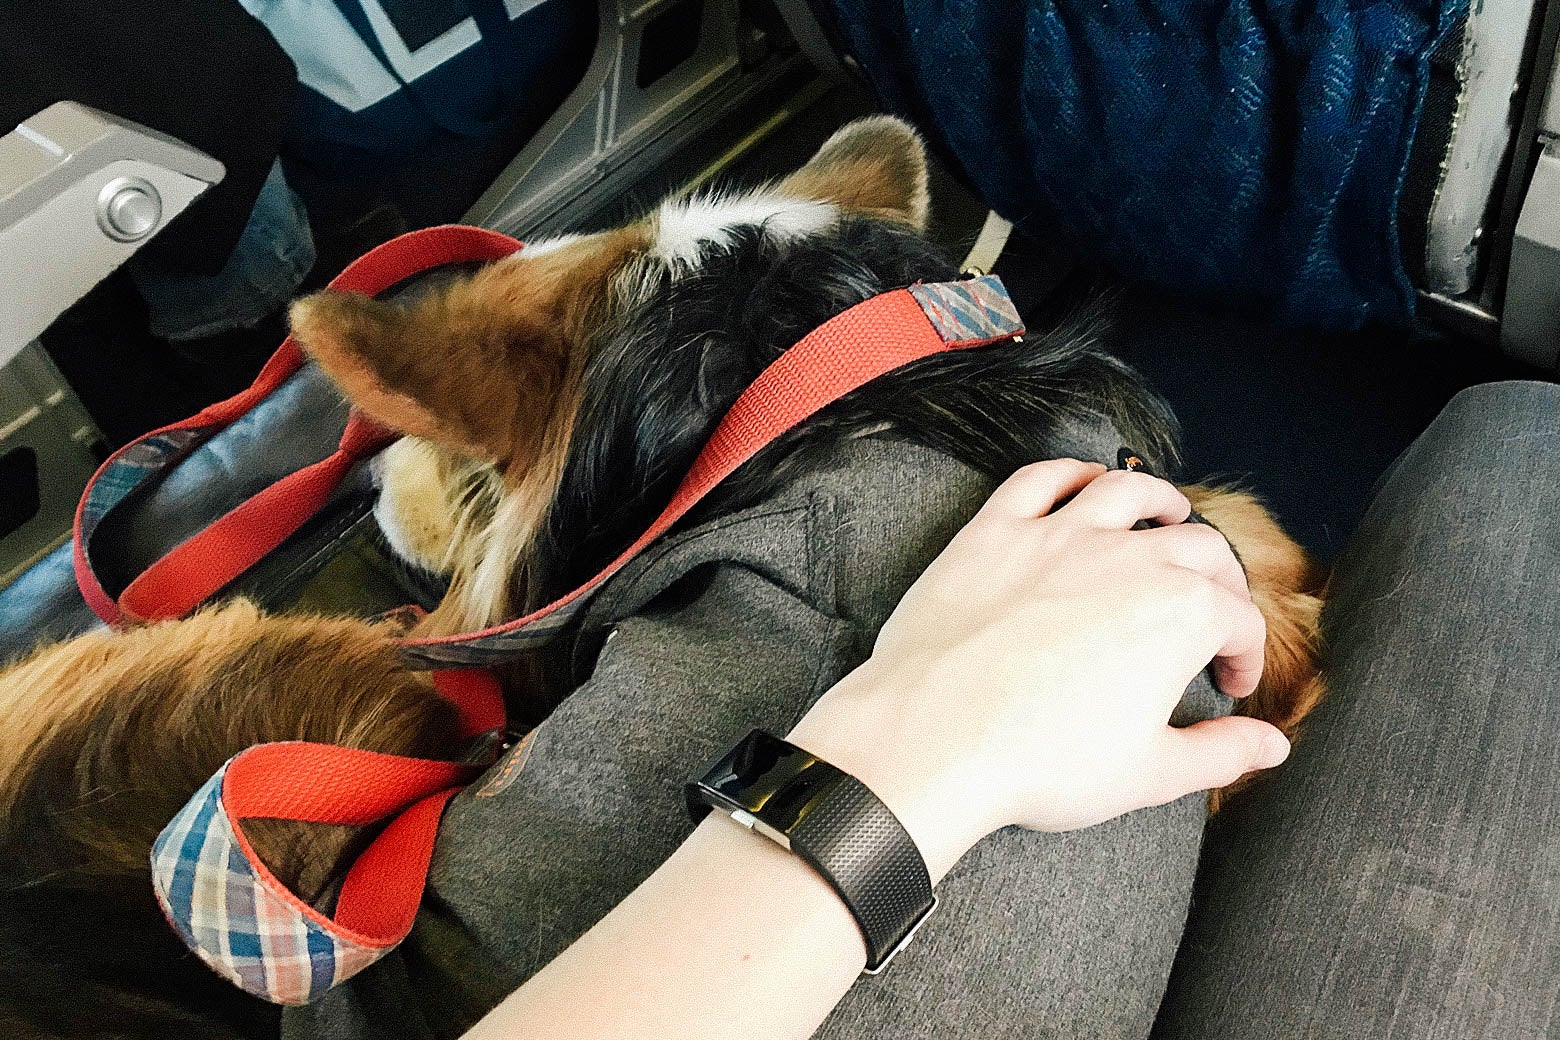 An emotional support corgi sleeps quietly next to a passenger on a plane.